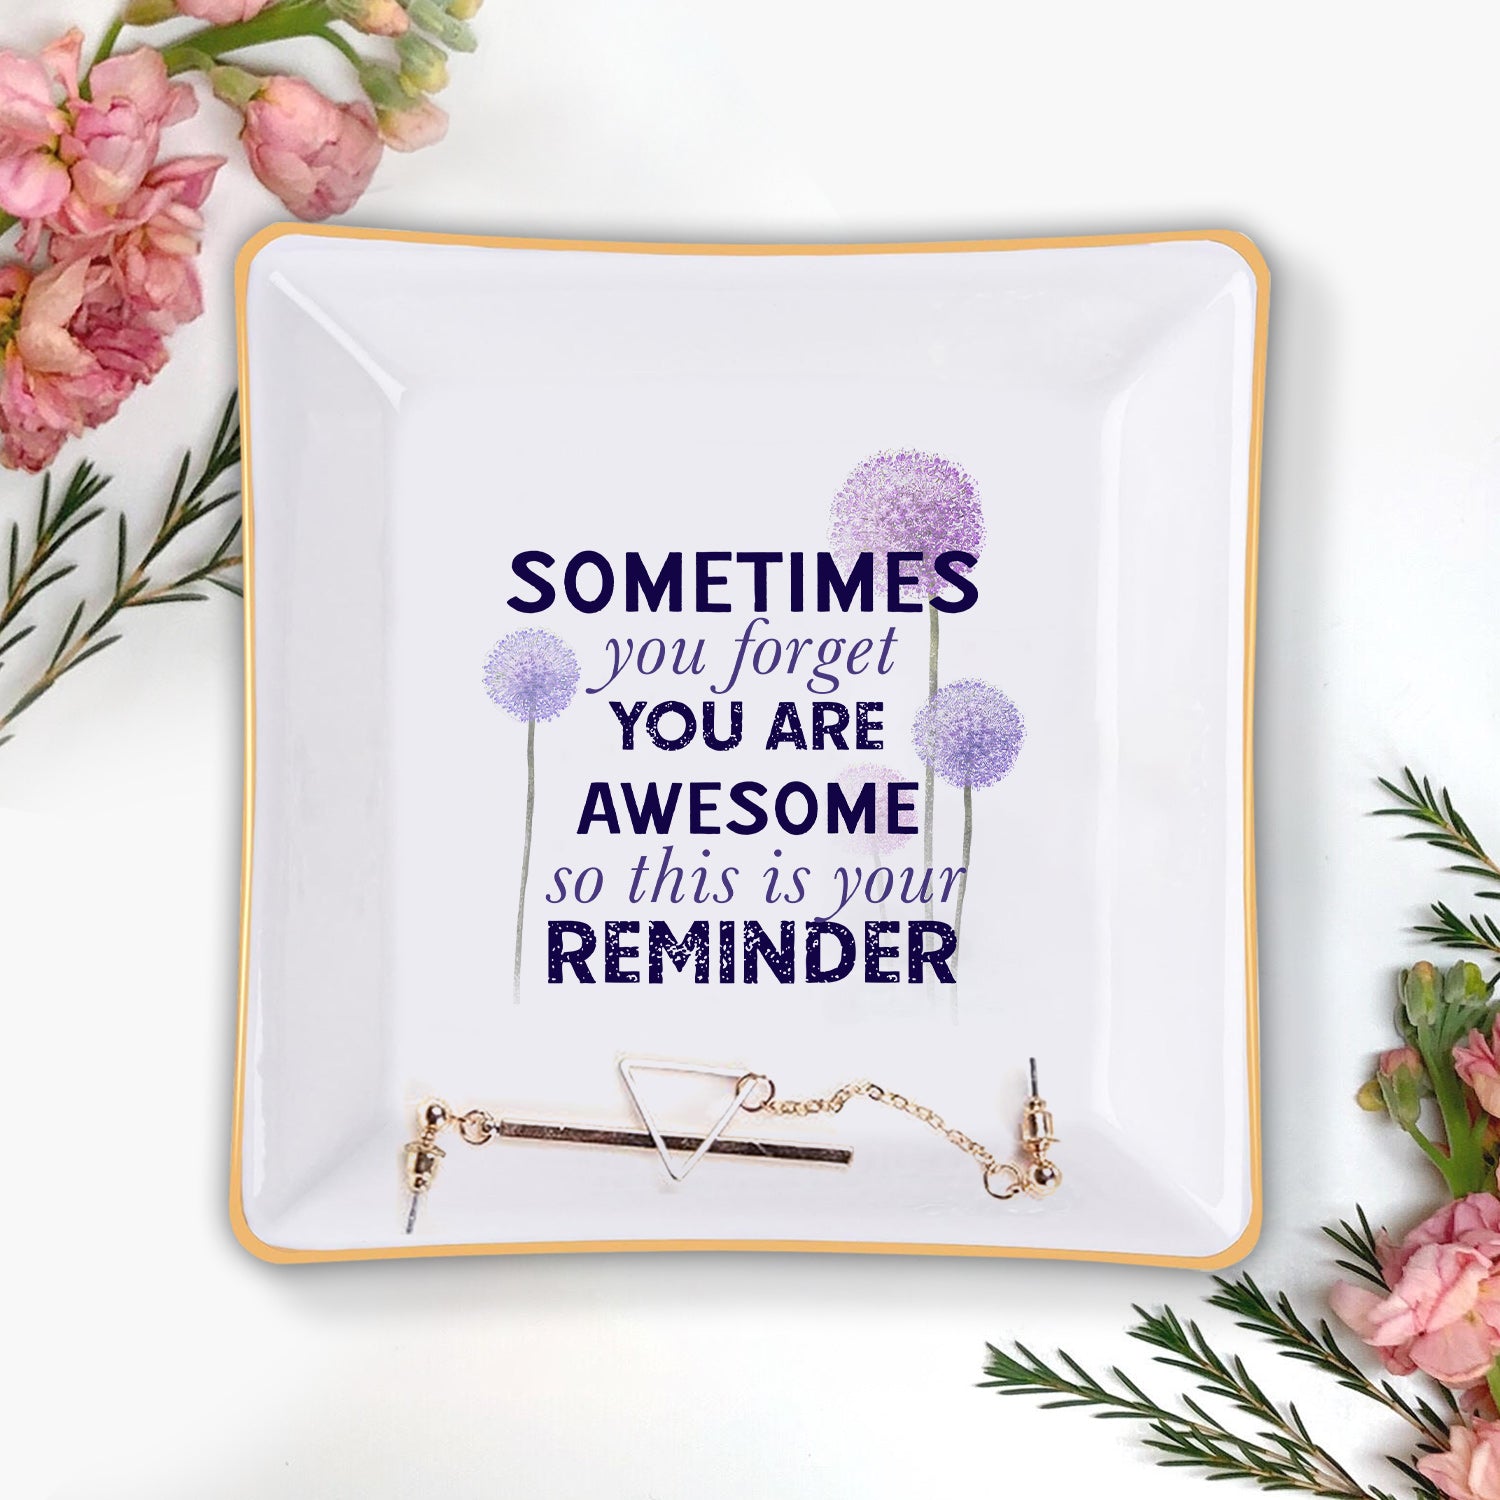 Sometimes You Forget You Are Awesome Verse Christian Gifts Inspirational Religious Gifts Ceramic Ring Dish